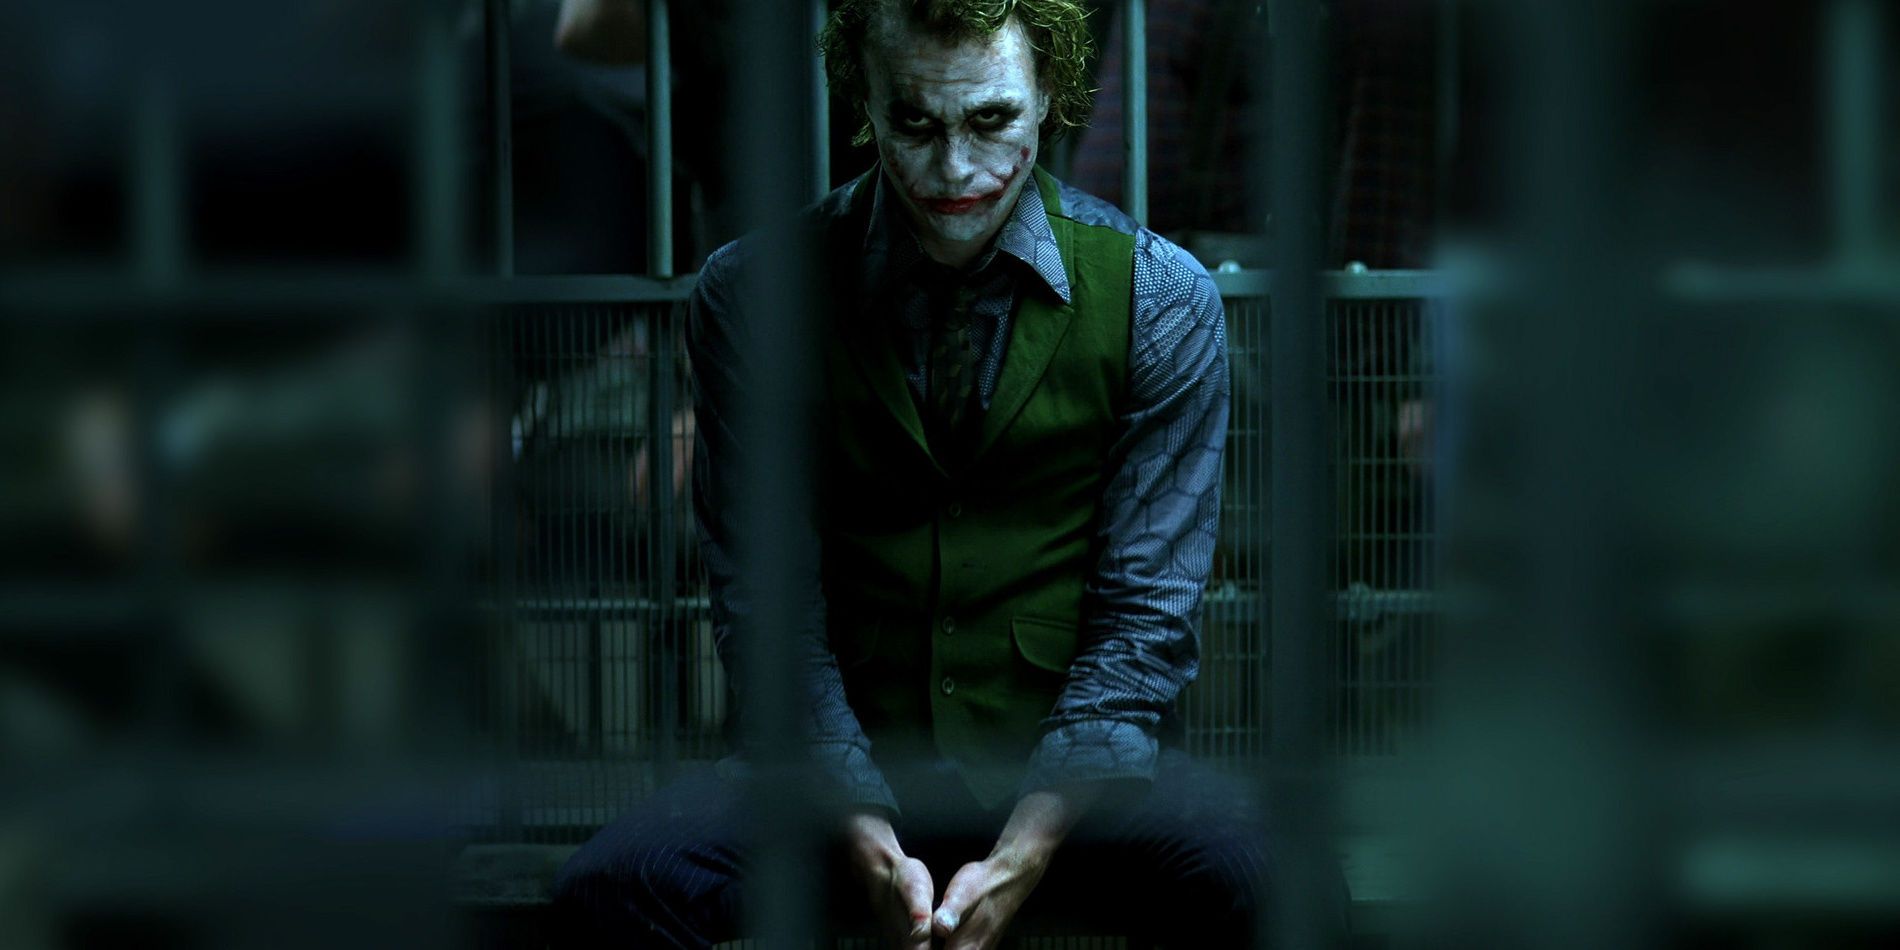 Heath Ledger as The Joker sitting in a cell in The Dark Knight (2008)